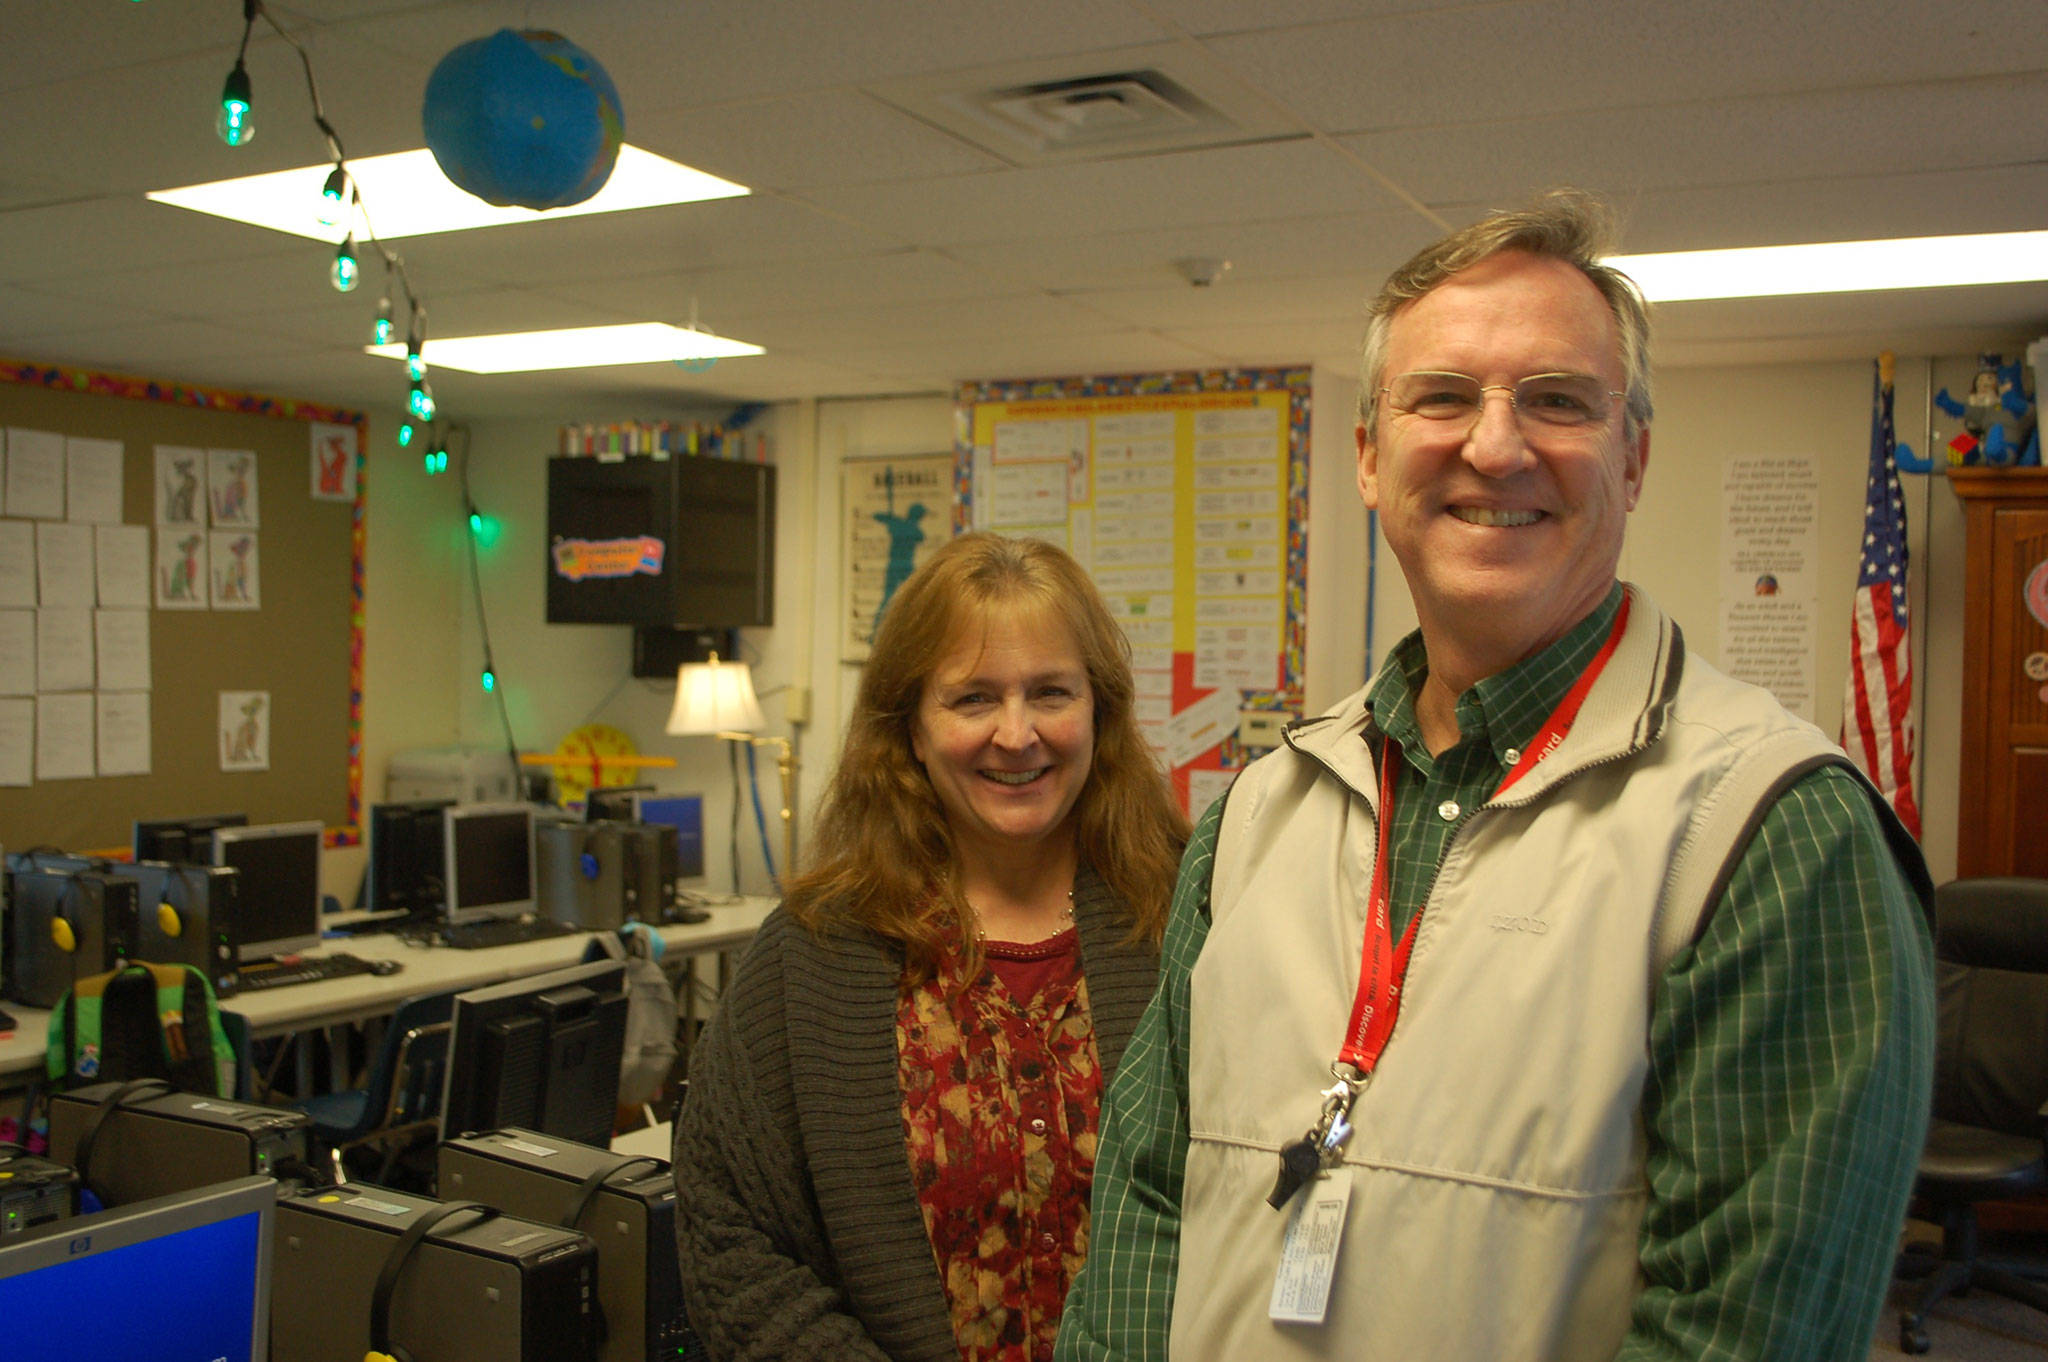 Melissa Withrow and Mark Knudson stand in what used to be the computer lab at Greywolf Elementary School that now serves as one of two new classrooms after more class sections were added at the first- and third-grade levels. (Erin Hawkins/Olympic Peninsula News Group)